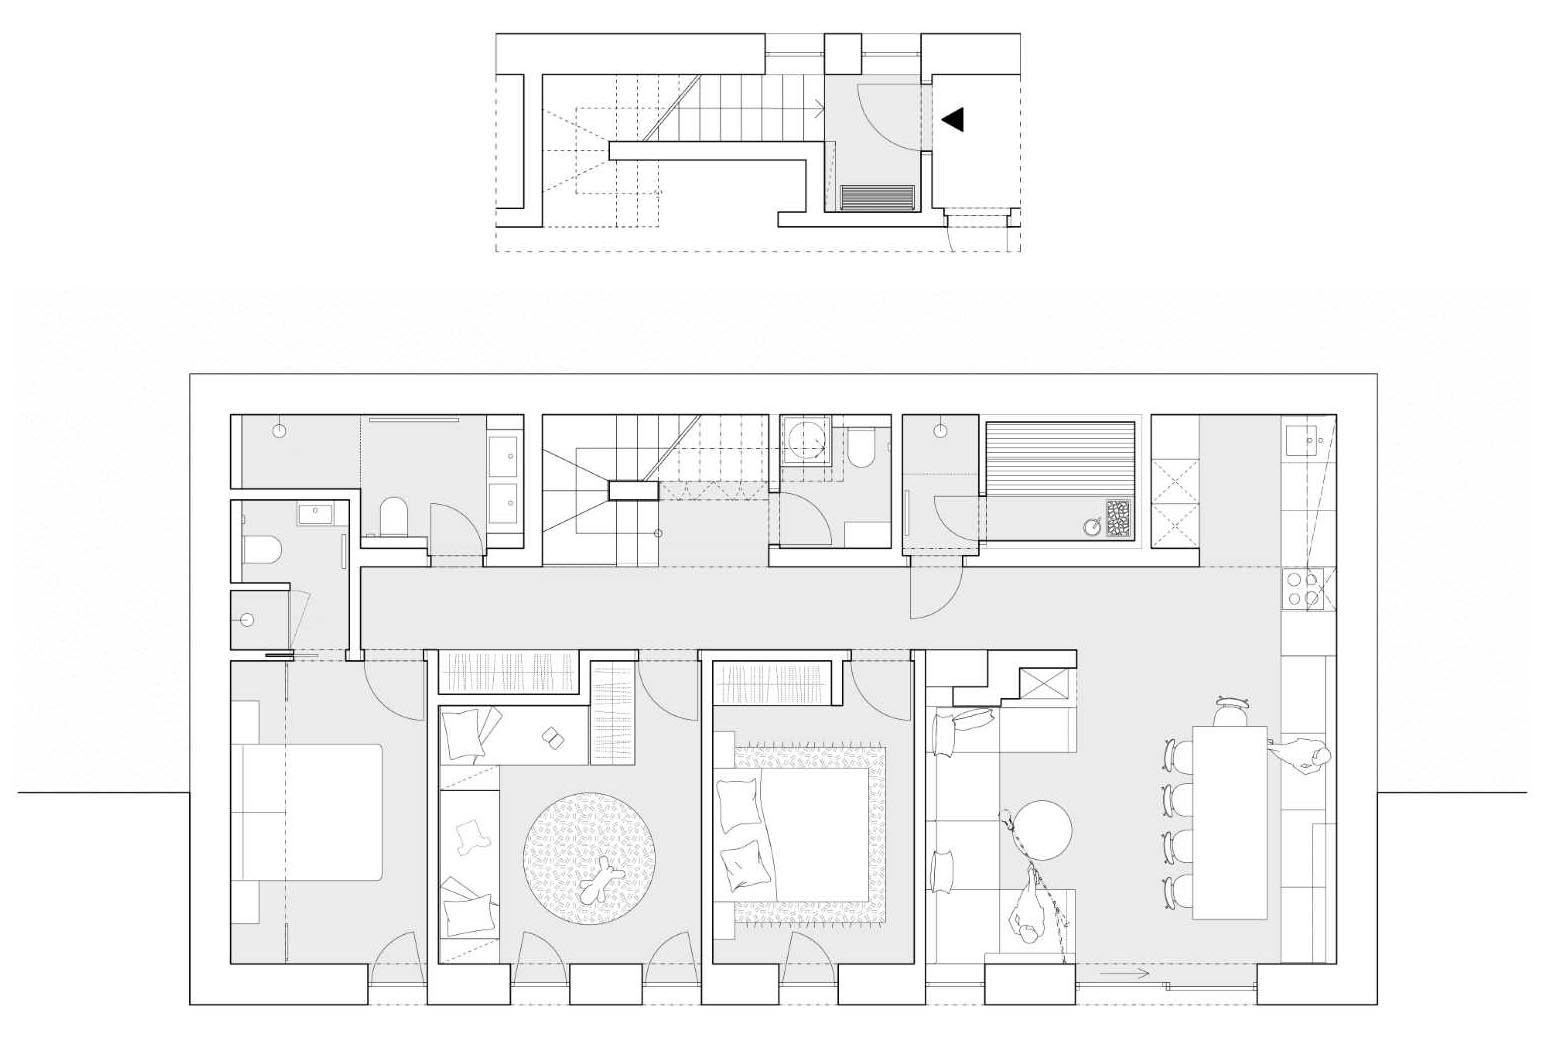 The floor plan of a modern apartment.